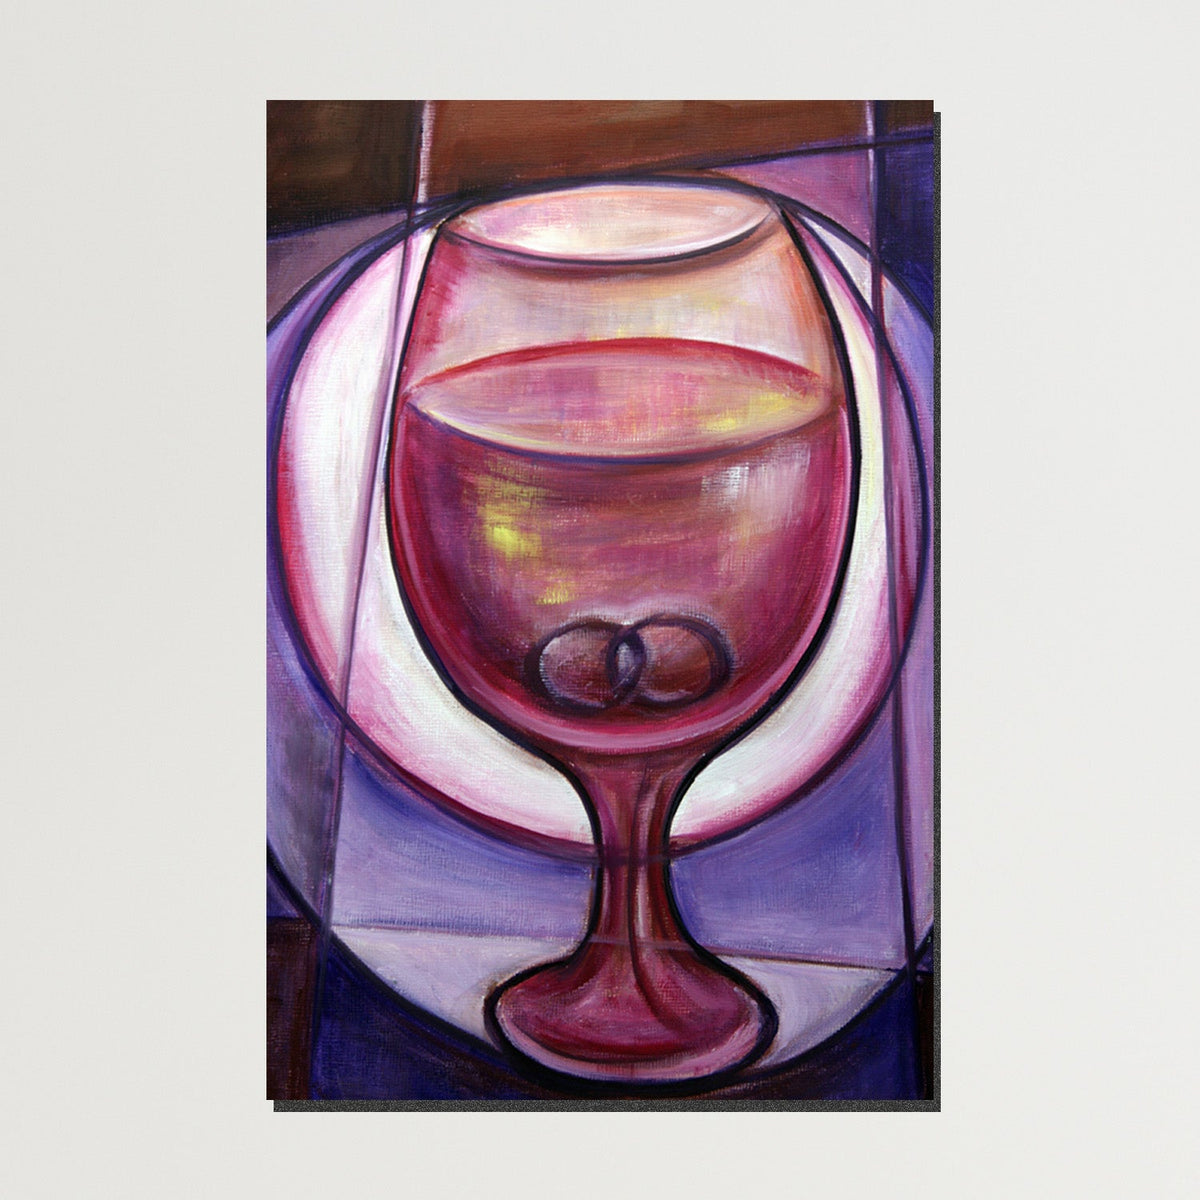 https://cdn.shopify.com/s/files/1/0387/9986/8044/products/WineglasswithtworingsCanvasArtPrintStretched-Plain.jpg